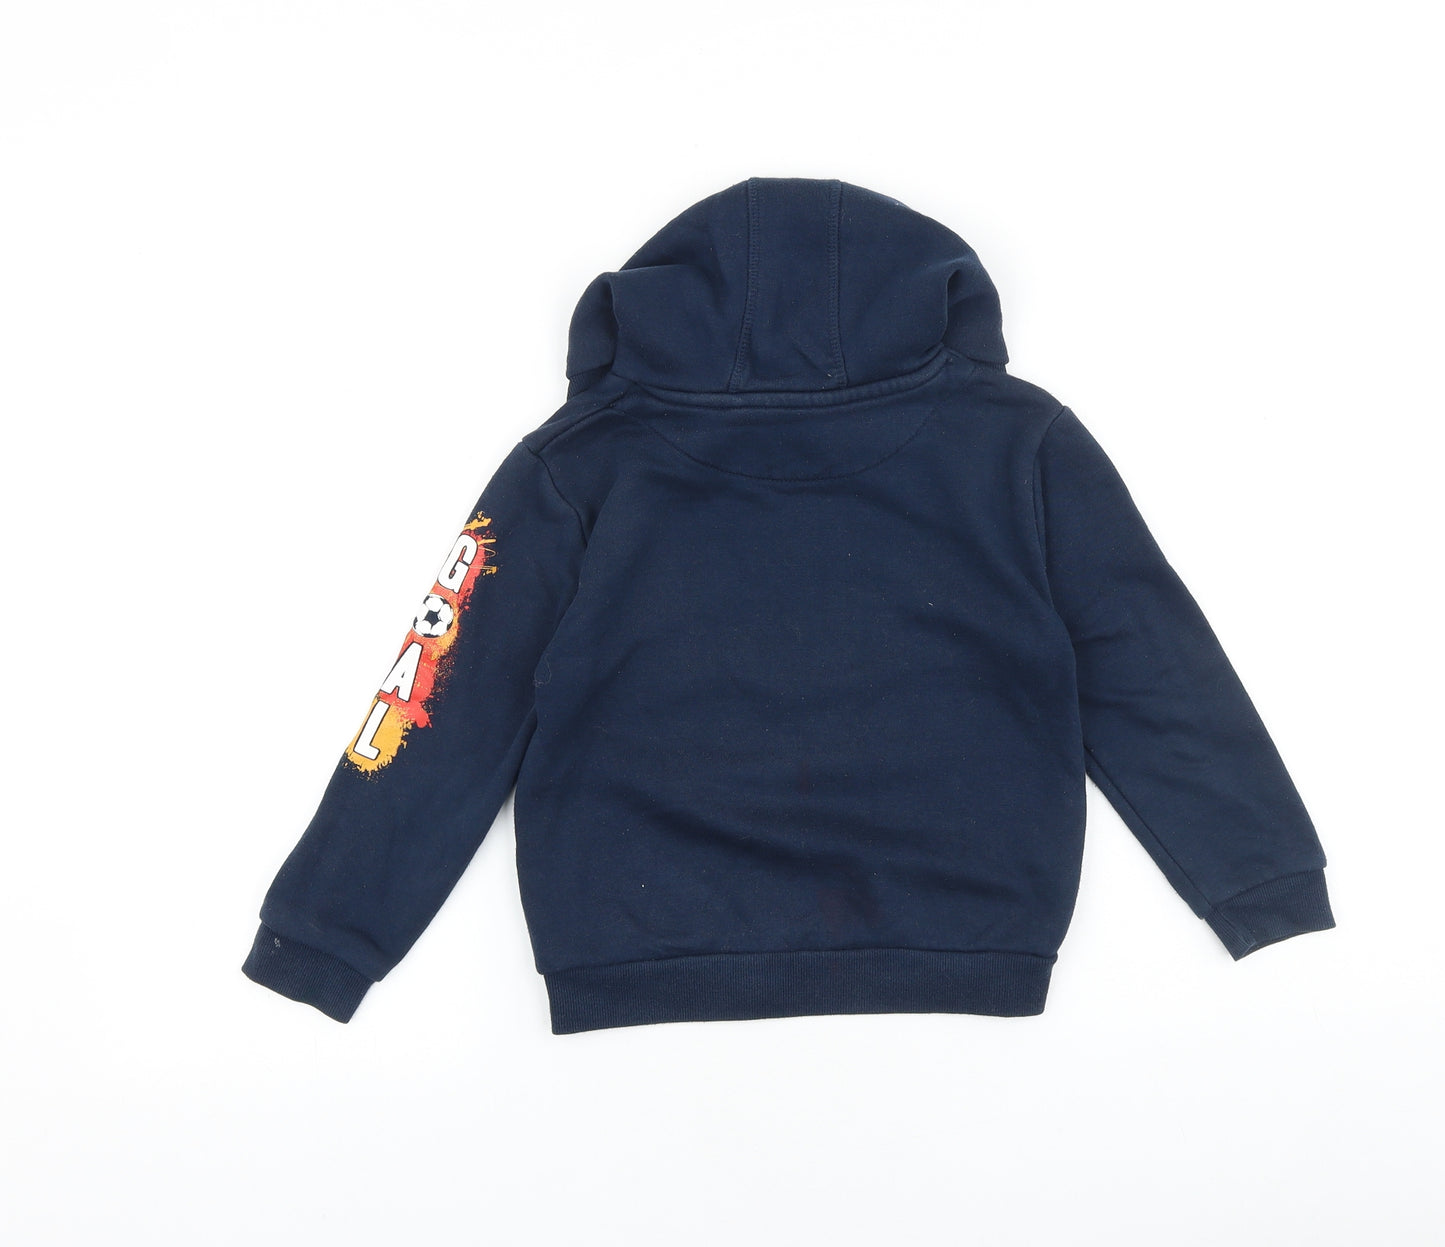 Primark Boys Blue 100% Cotton Pullover Hoodie Size 4-5 Years Pullover - Game on!